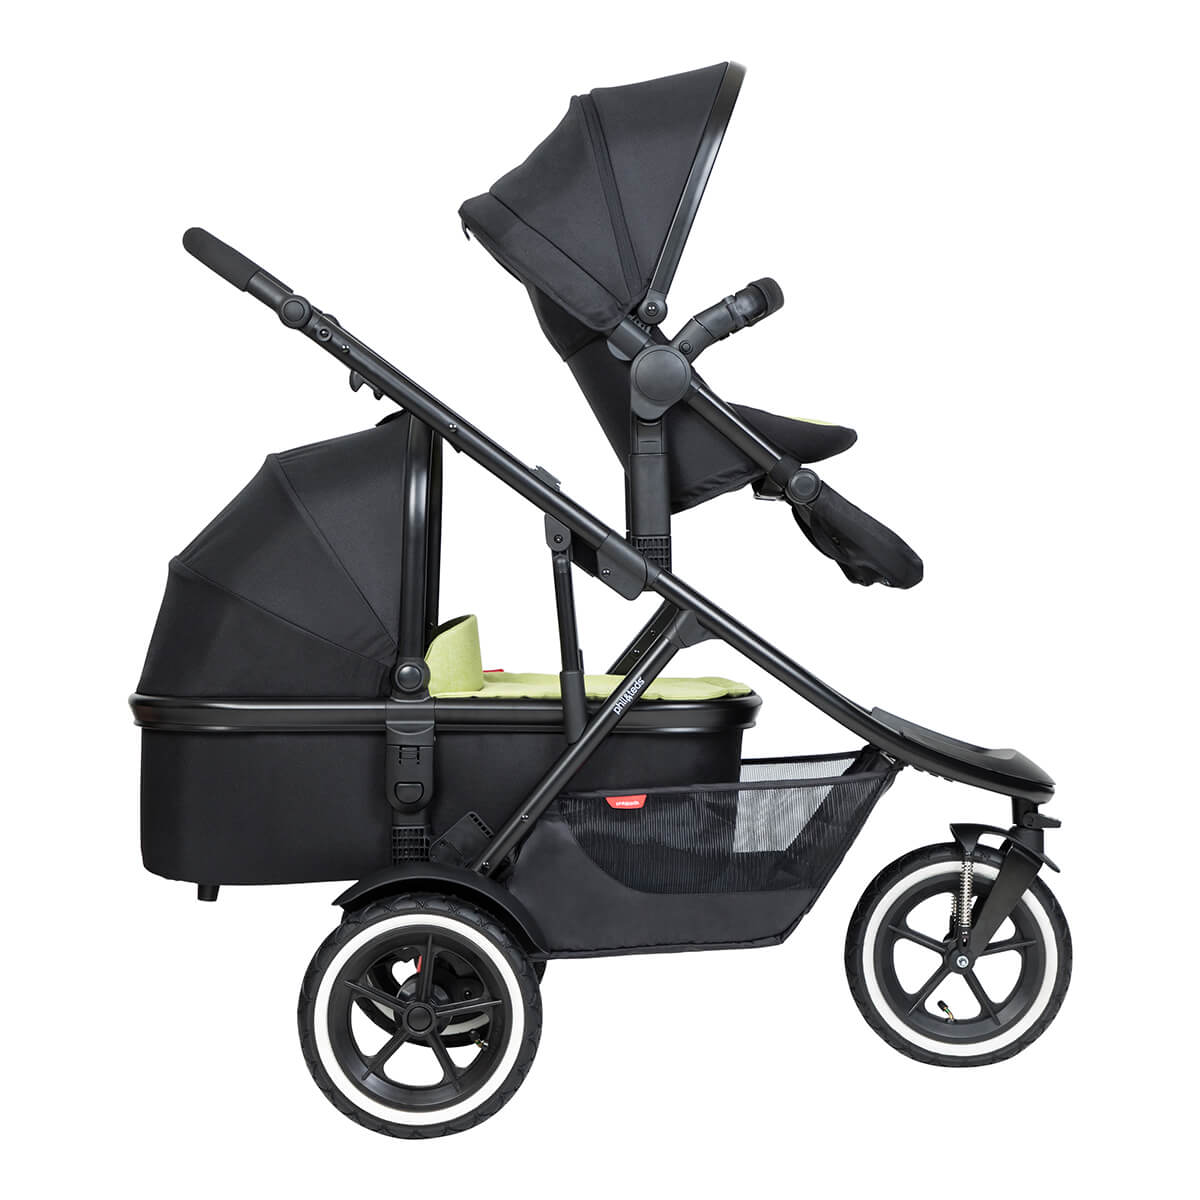 https://cdn.accentuate.io/8582363054419/19272668282968/philteds-sport-poussette-with-double-kit-extended-clip-and-snug-carrycot-side-view-v1700698189629.jpg?1200x1200